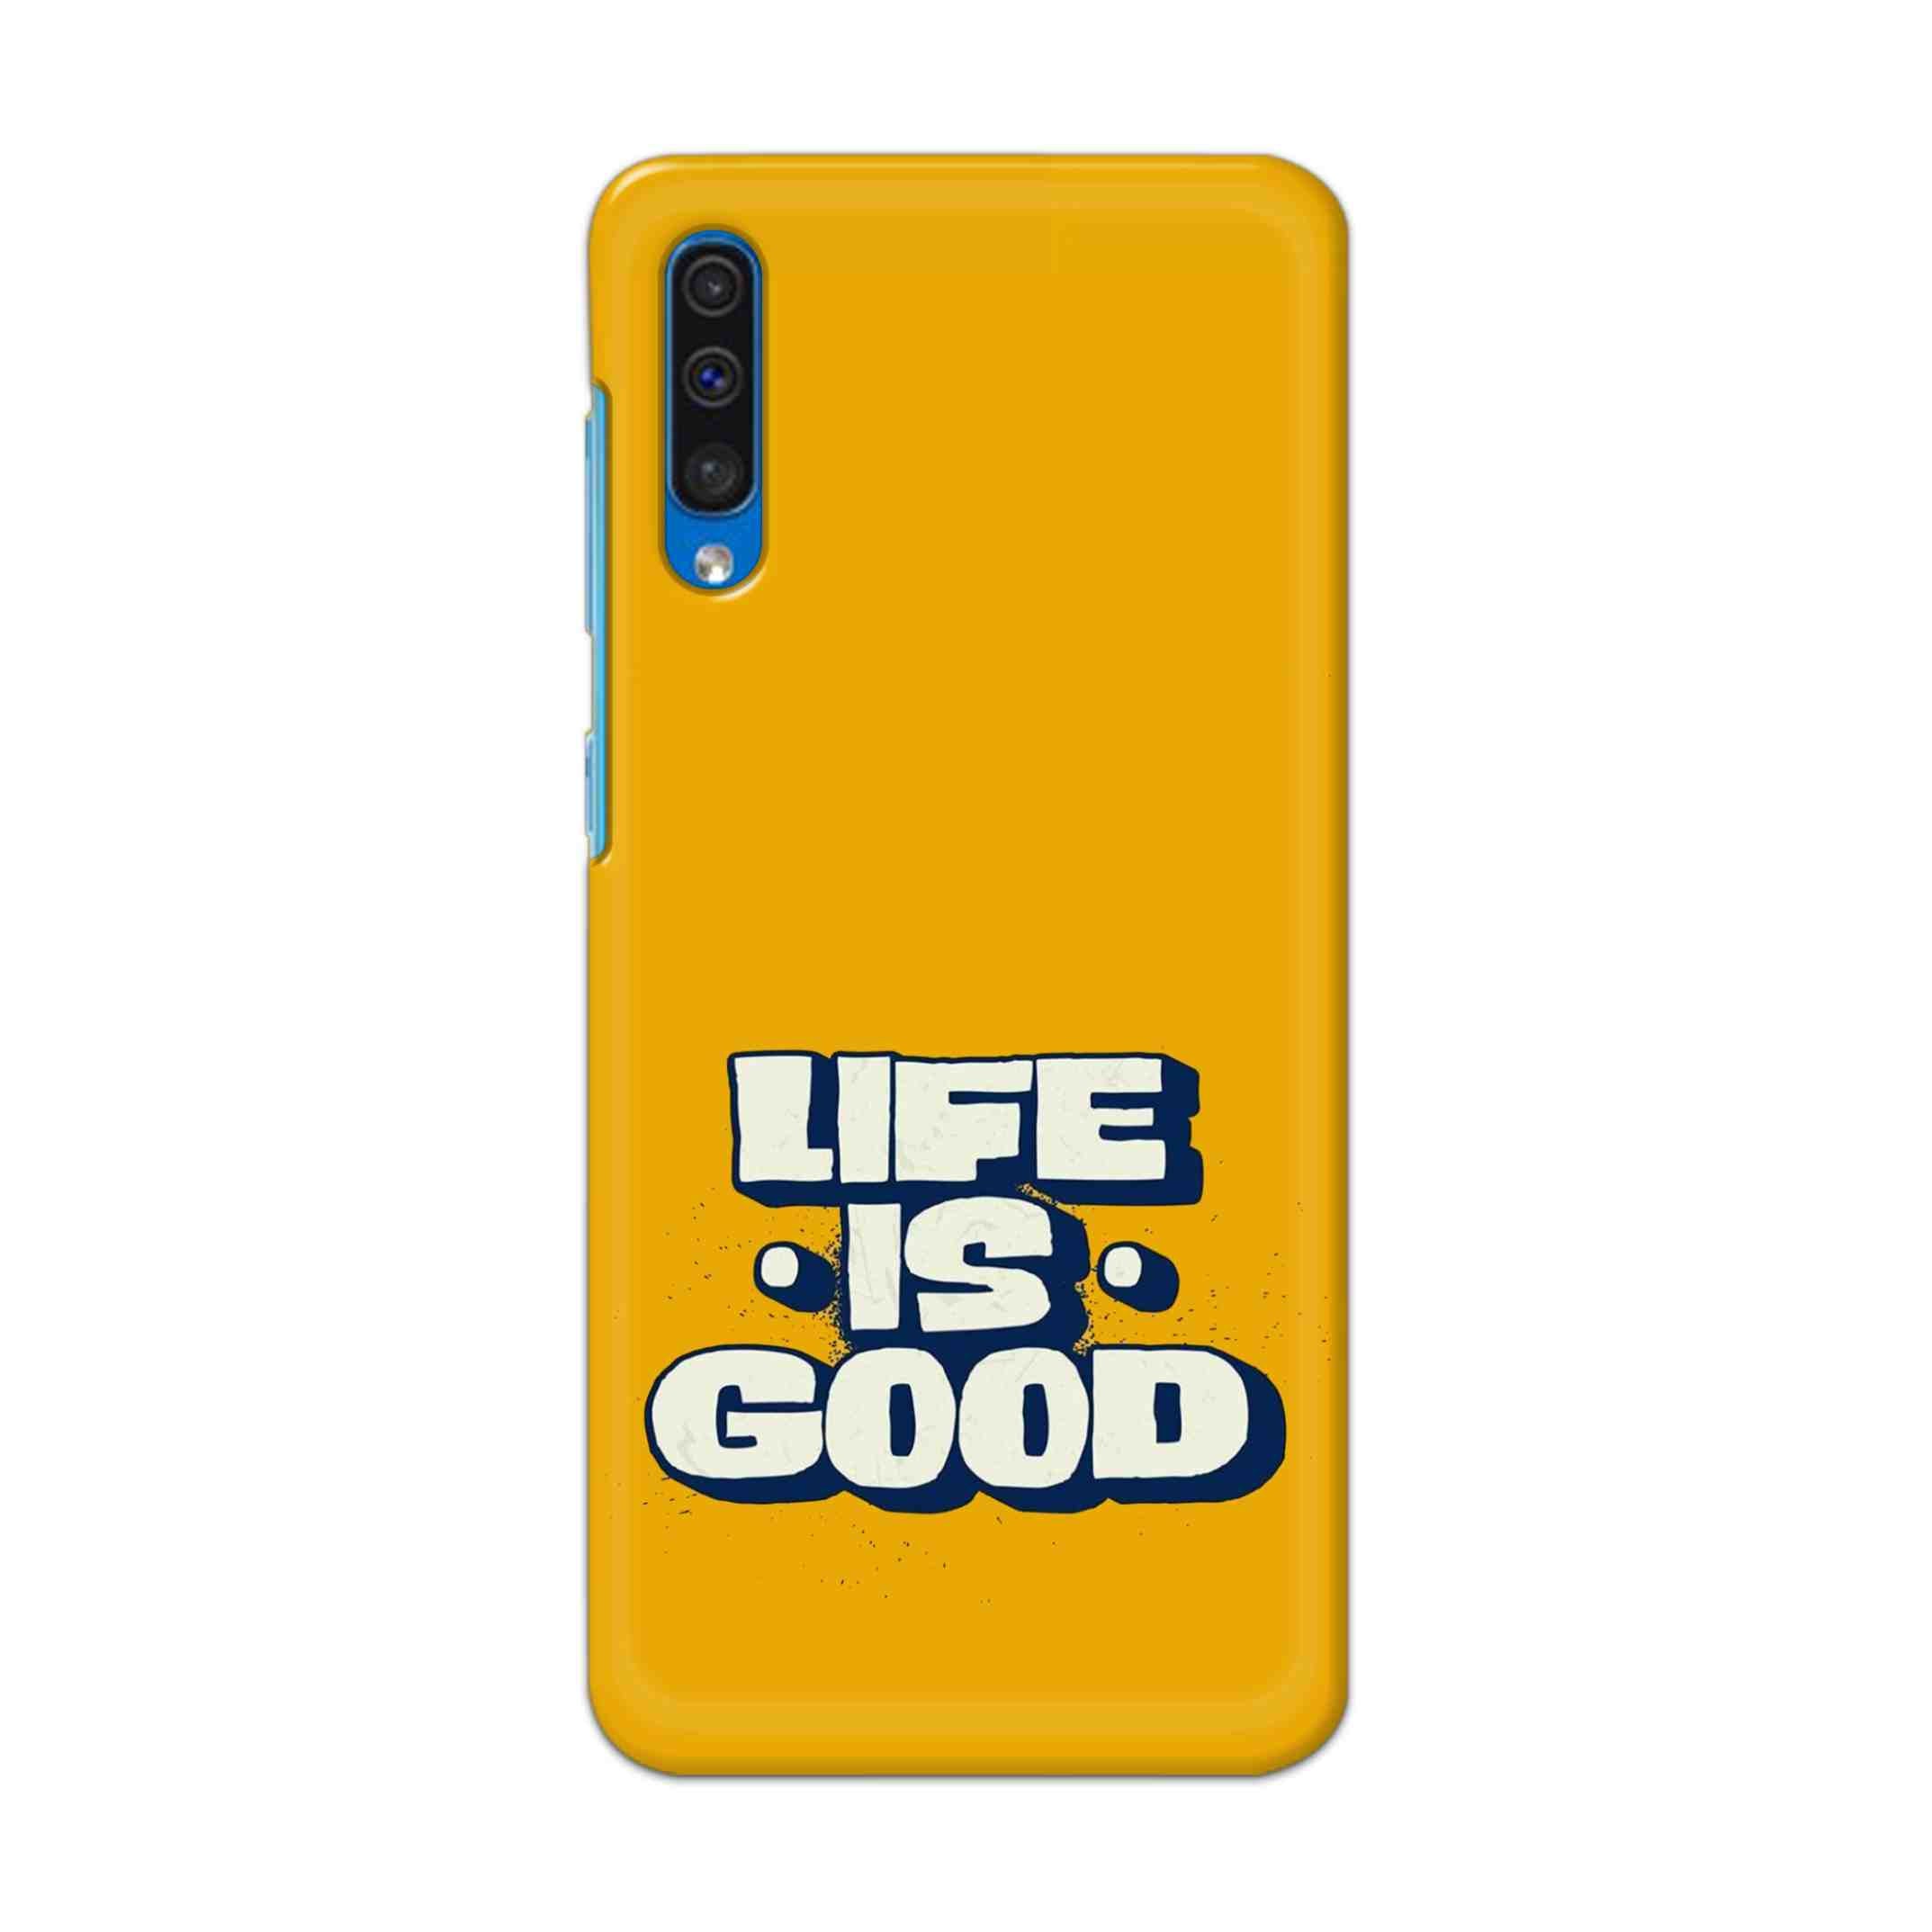 Buy Life Is Good Hard Back Mobile Phone Case Cover For Samsung Galaxy A50 / A50s / A30s Online